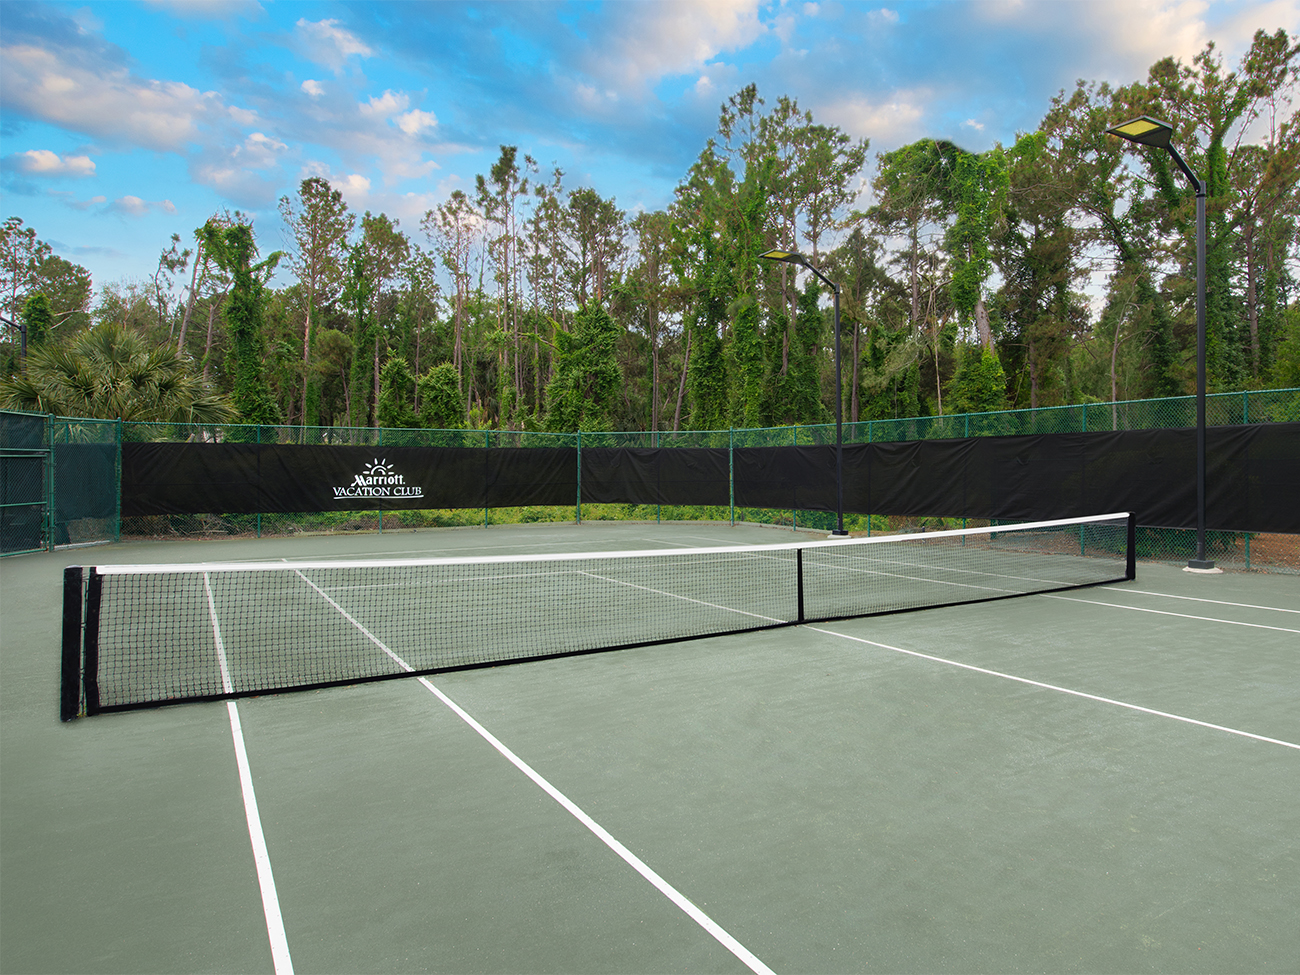 Marriott's Harbour Point Tennis Court. Marriott's Harbour Point is located in Hilton Head Island, South Carolina United States.